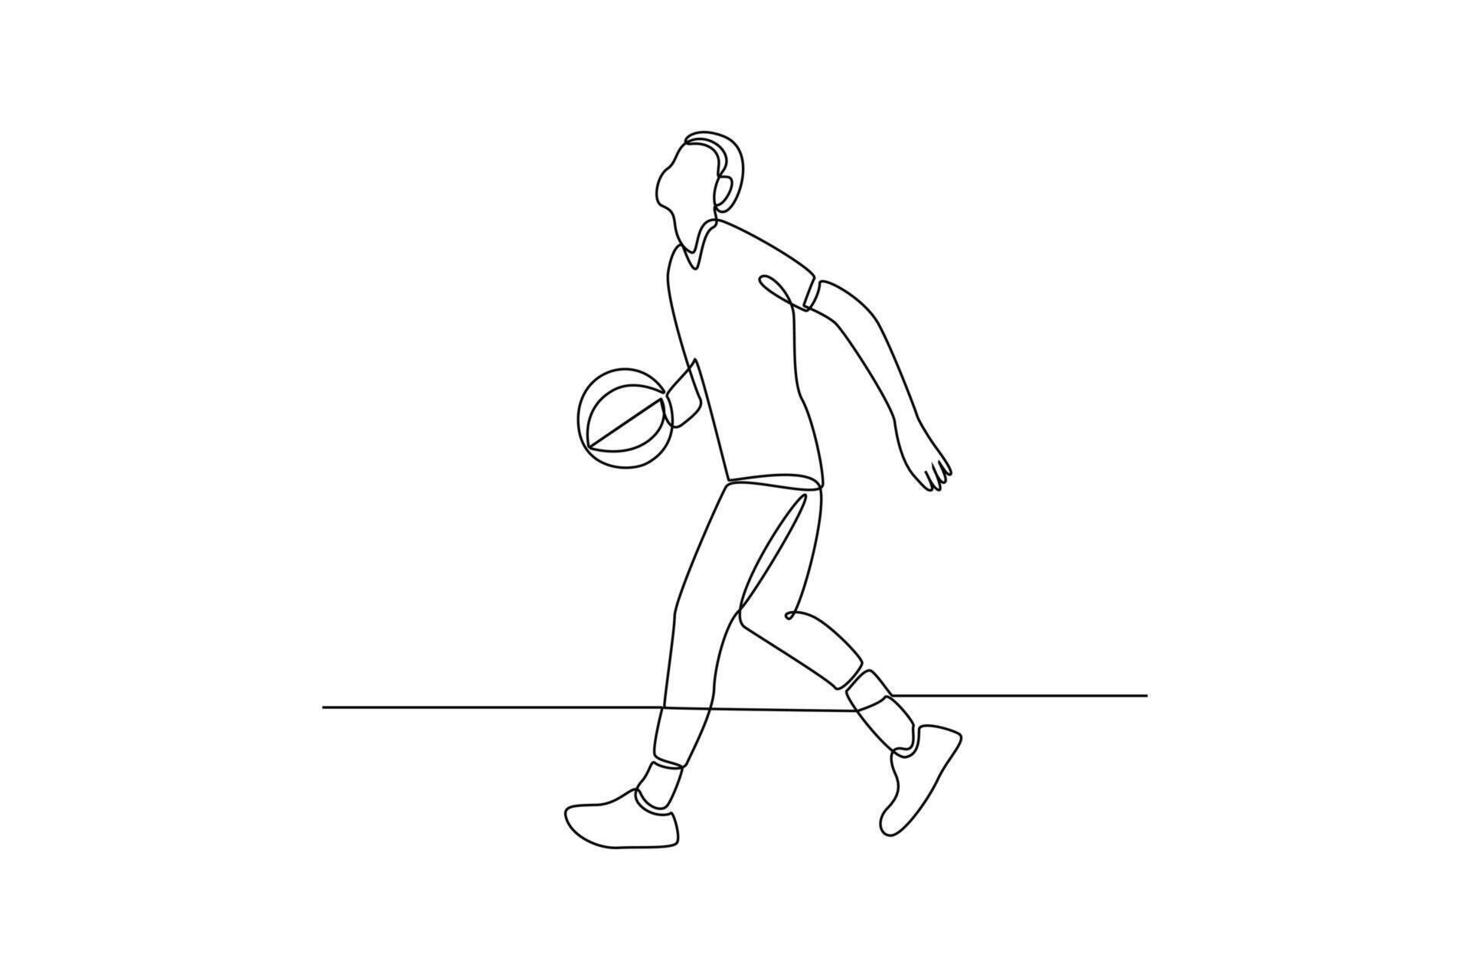 Continuous one line drawing Basket ball concept. Doodle vector illustration.